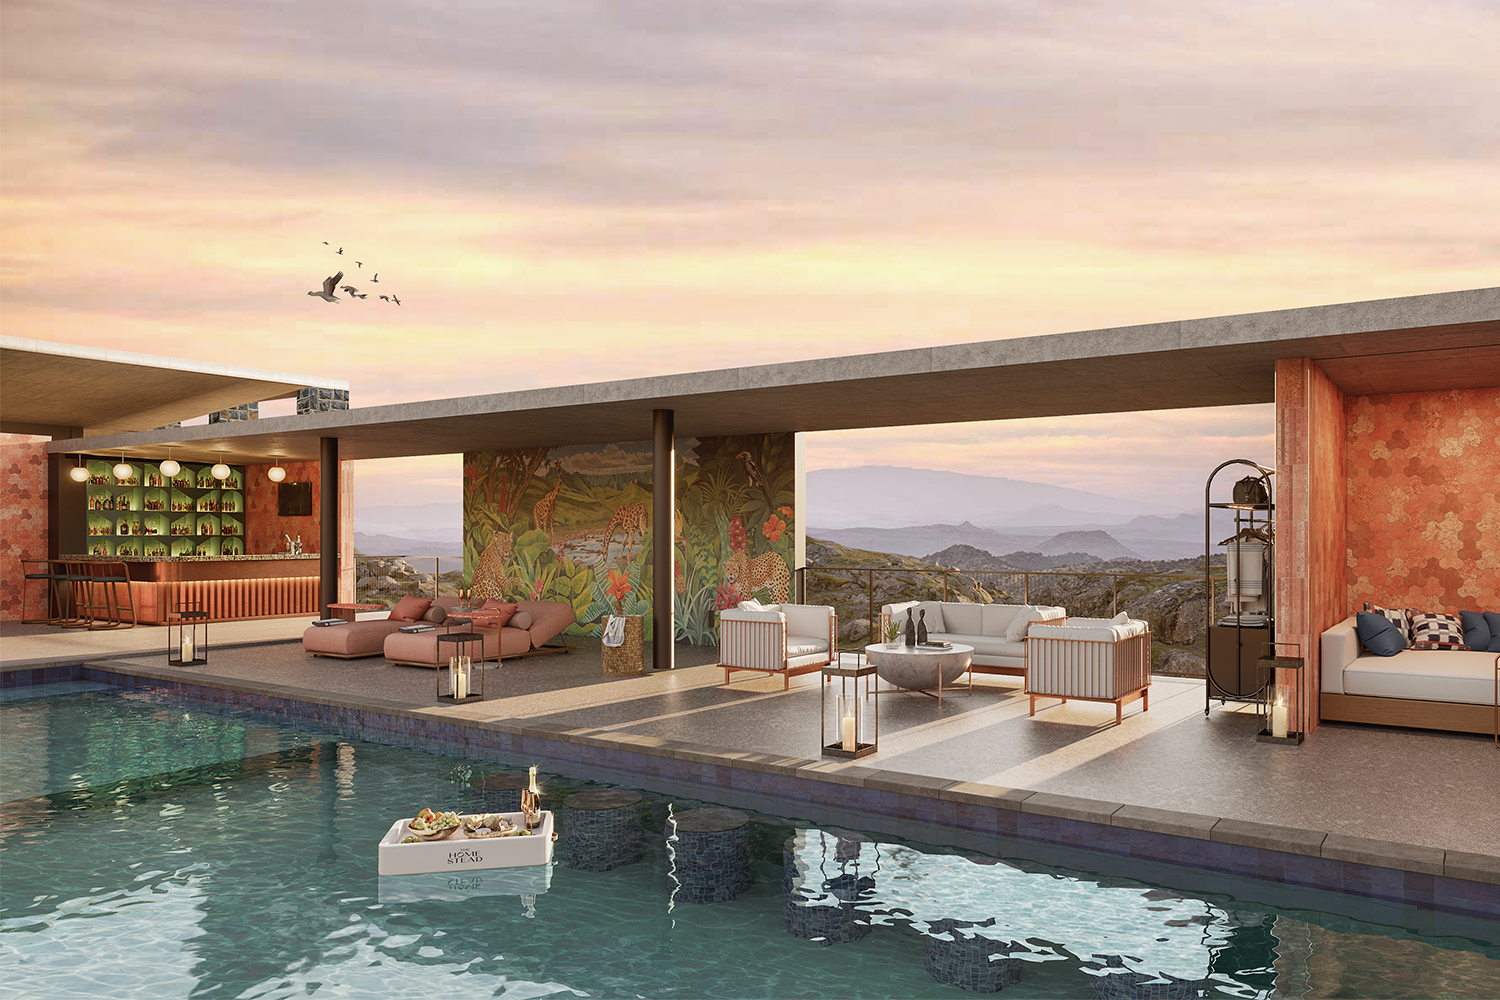 The pool at The Homestead, a new safari lodge in South Africa